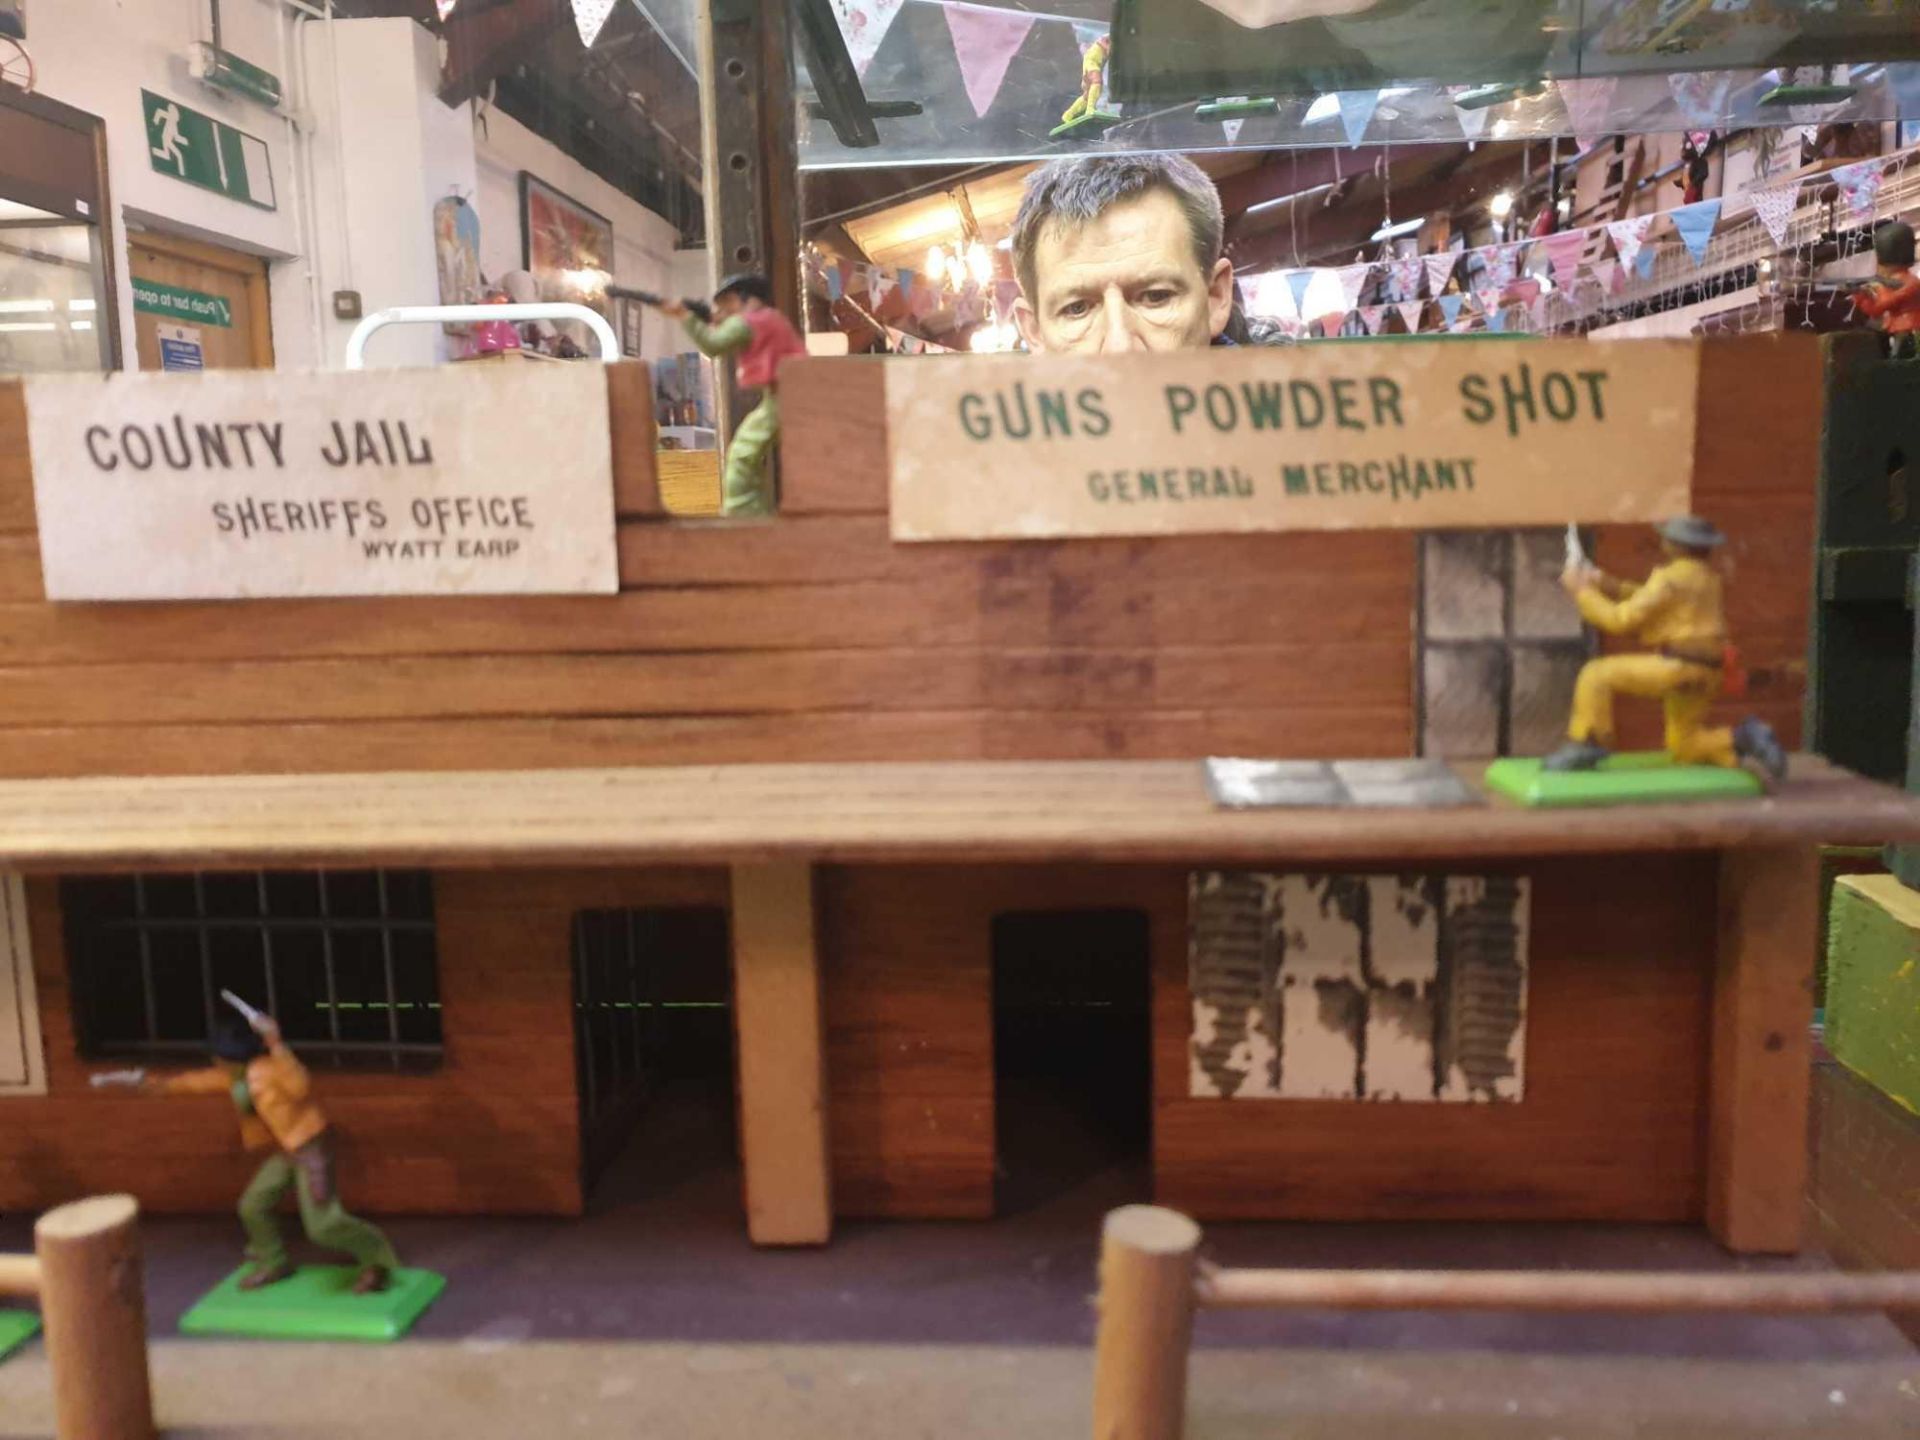 Hand Built Wooden Model Of A Dodge City Western Town 920 x 200 x 150 Complete With 14x W Britains - Image 4 of 5